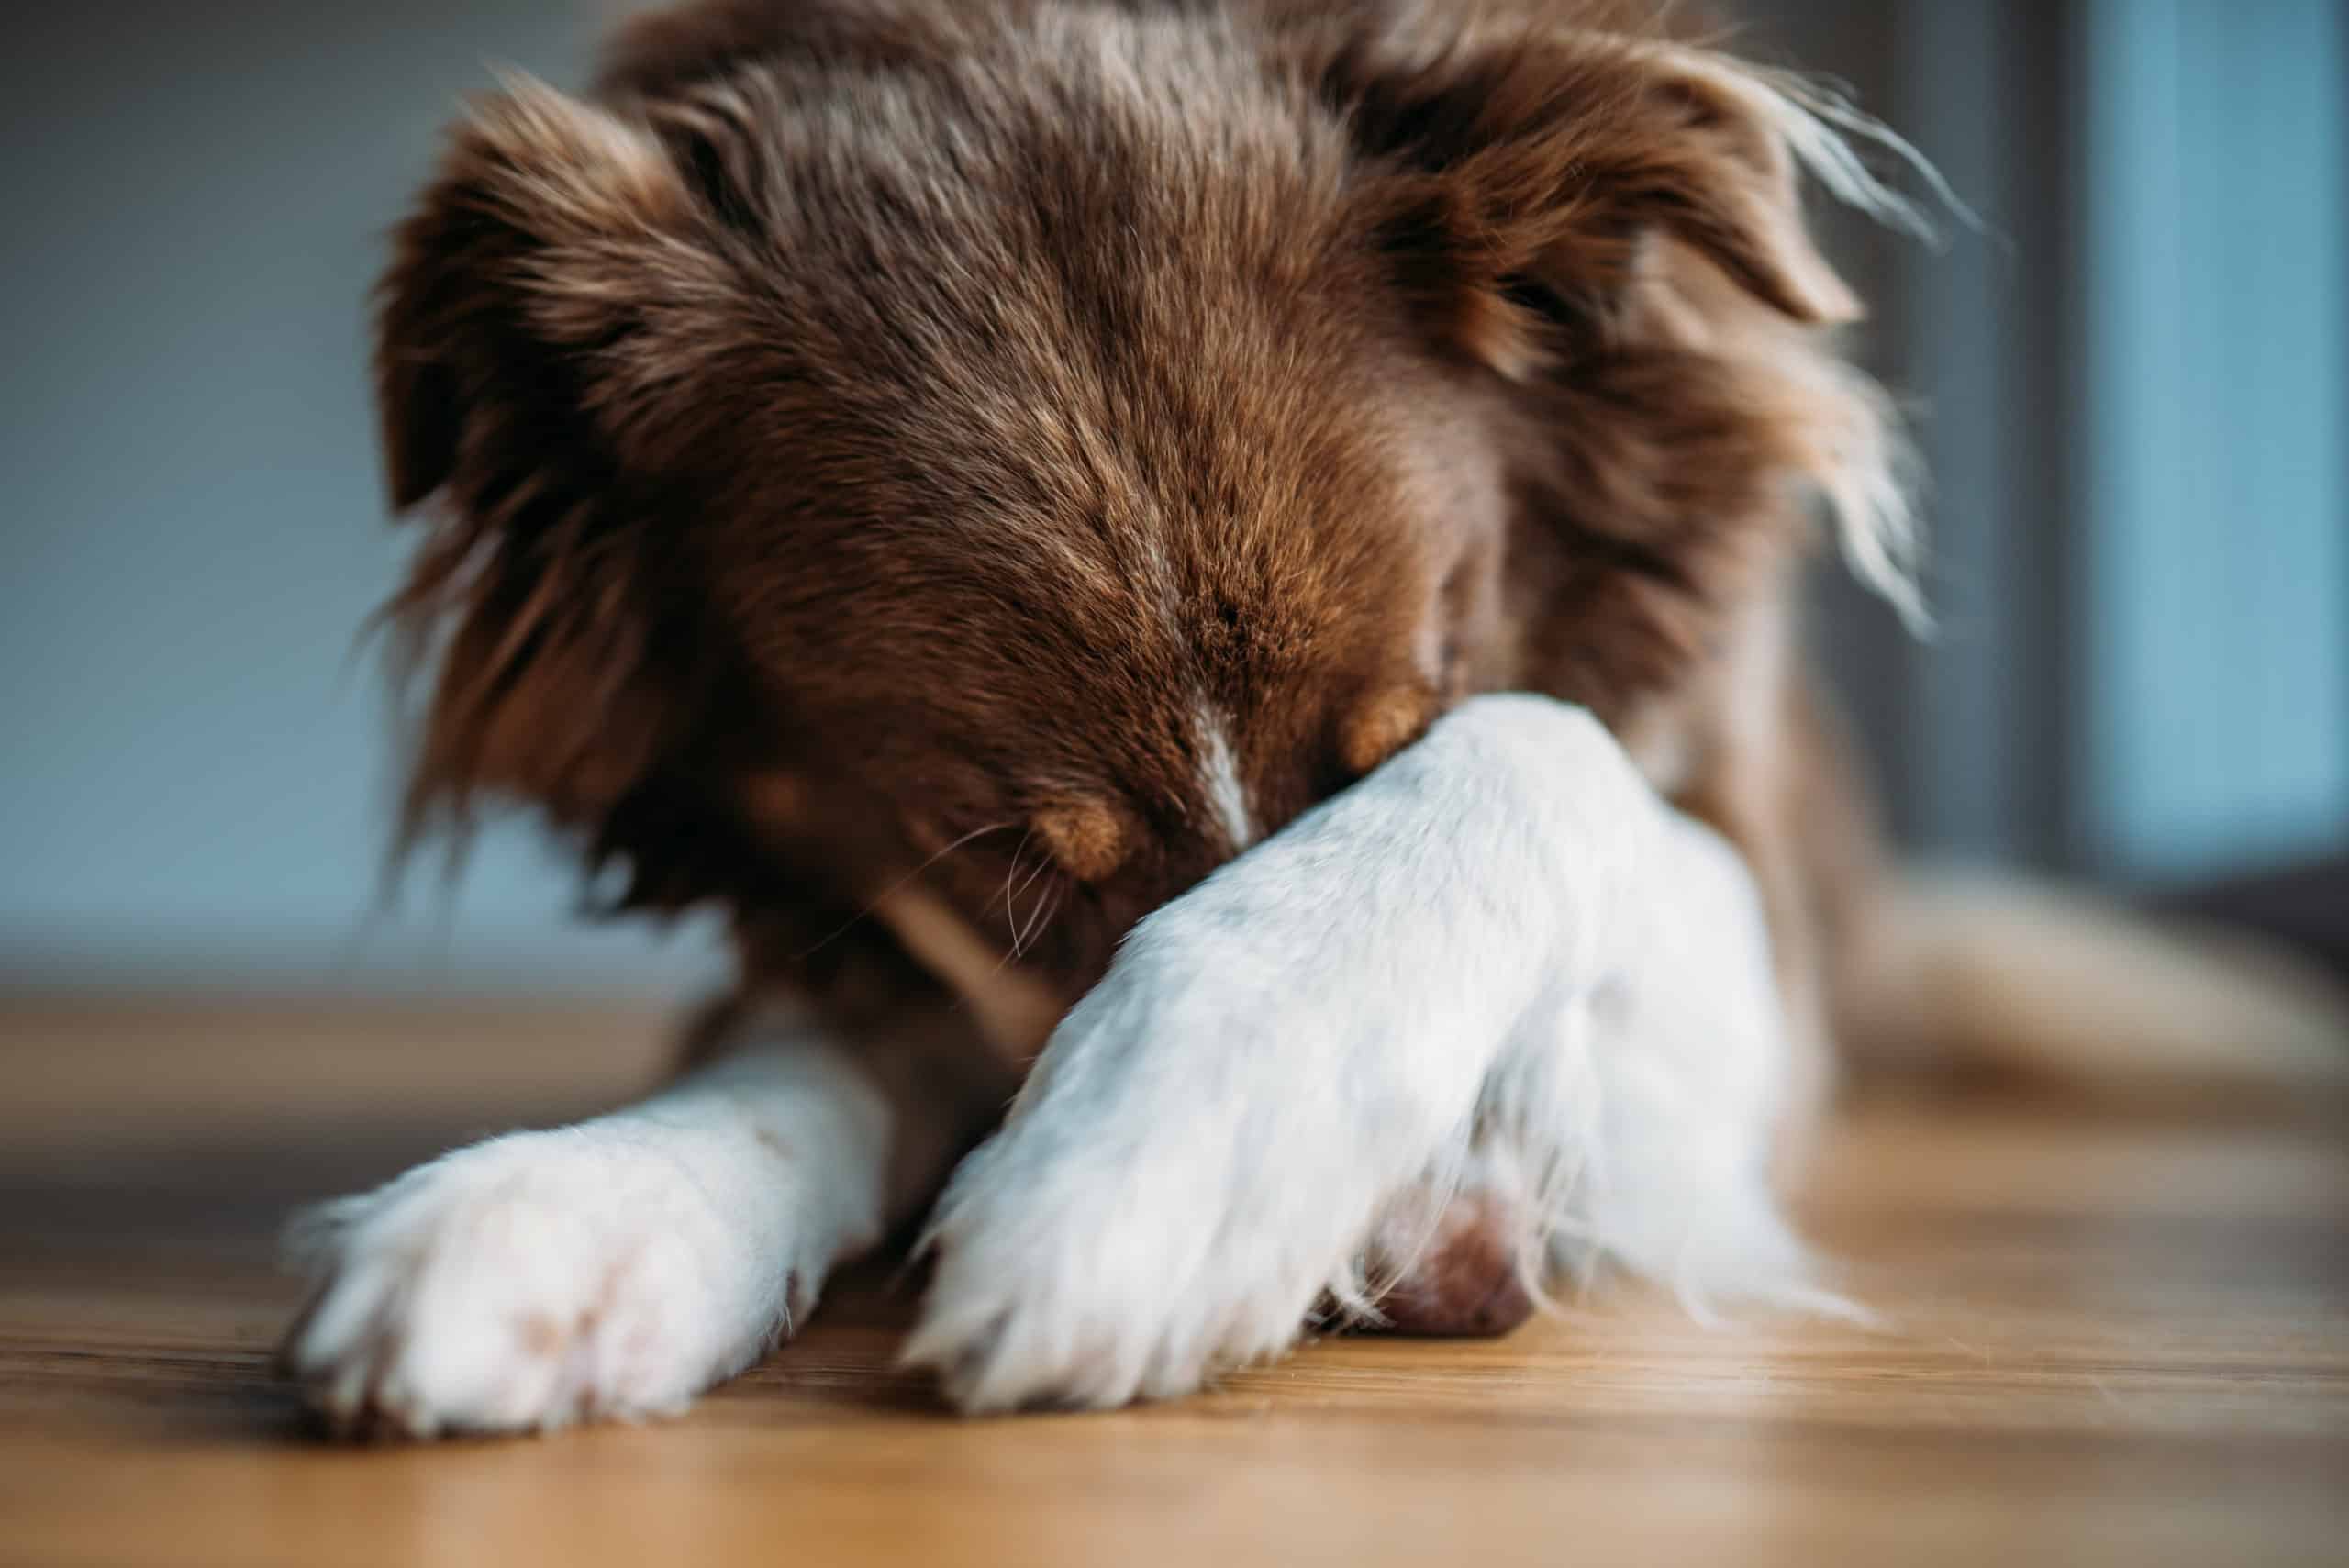 Why do dogs smell your farts?